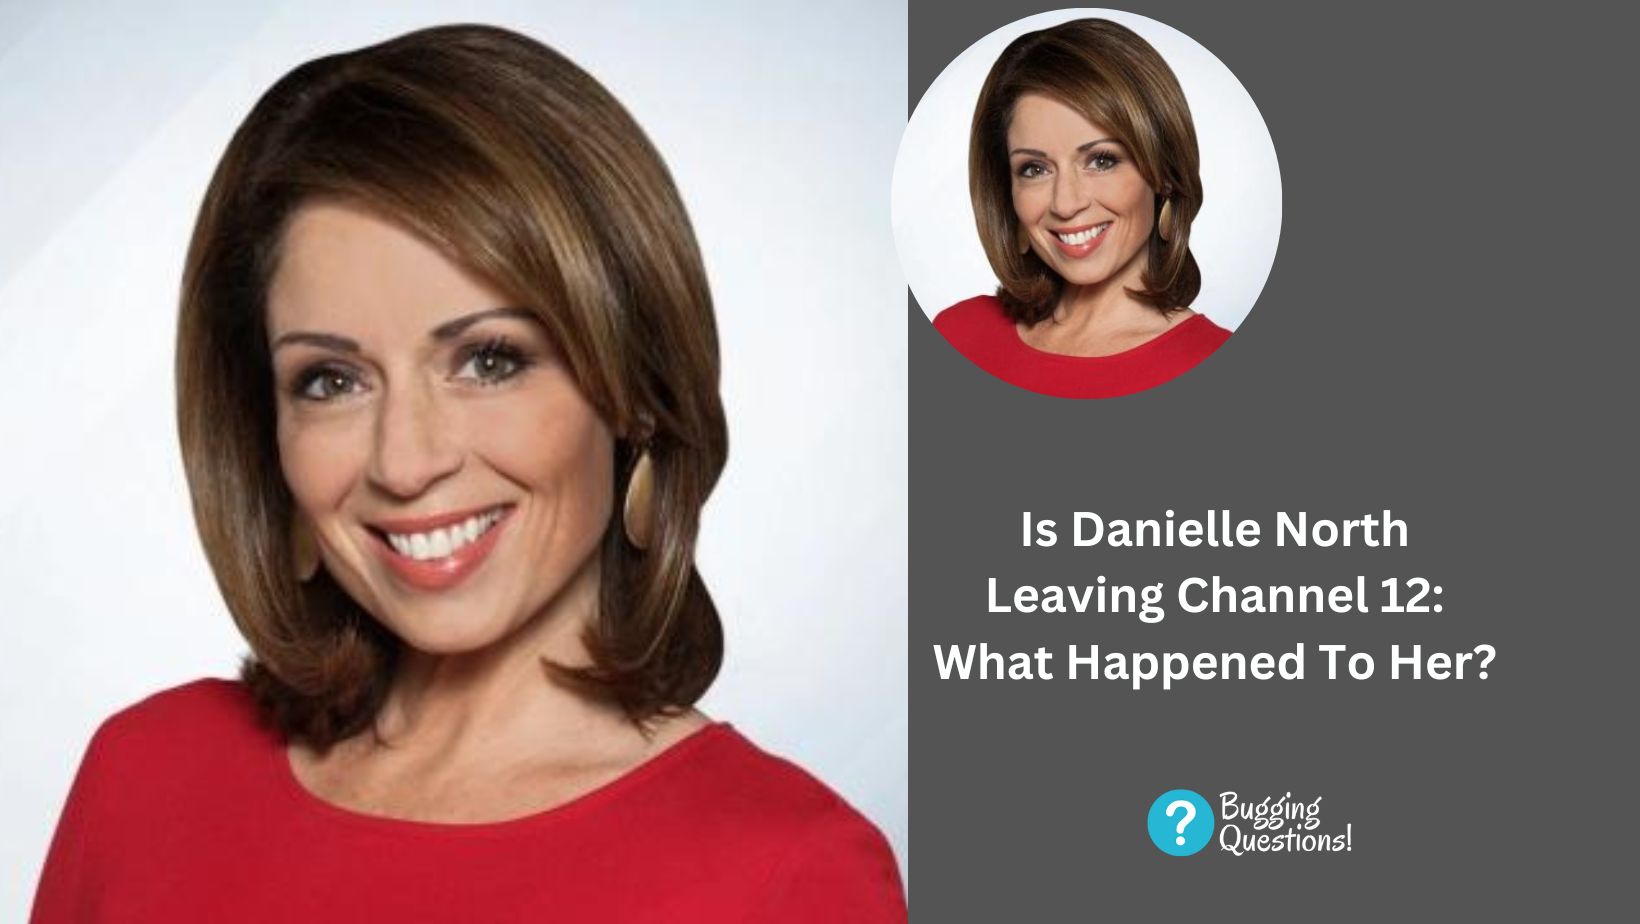 Is Danielle North Leaving Channel 12: What Happened To Her?